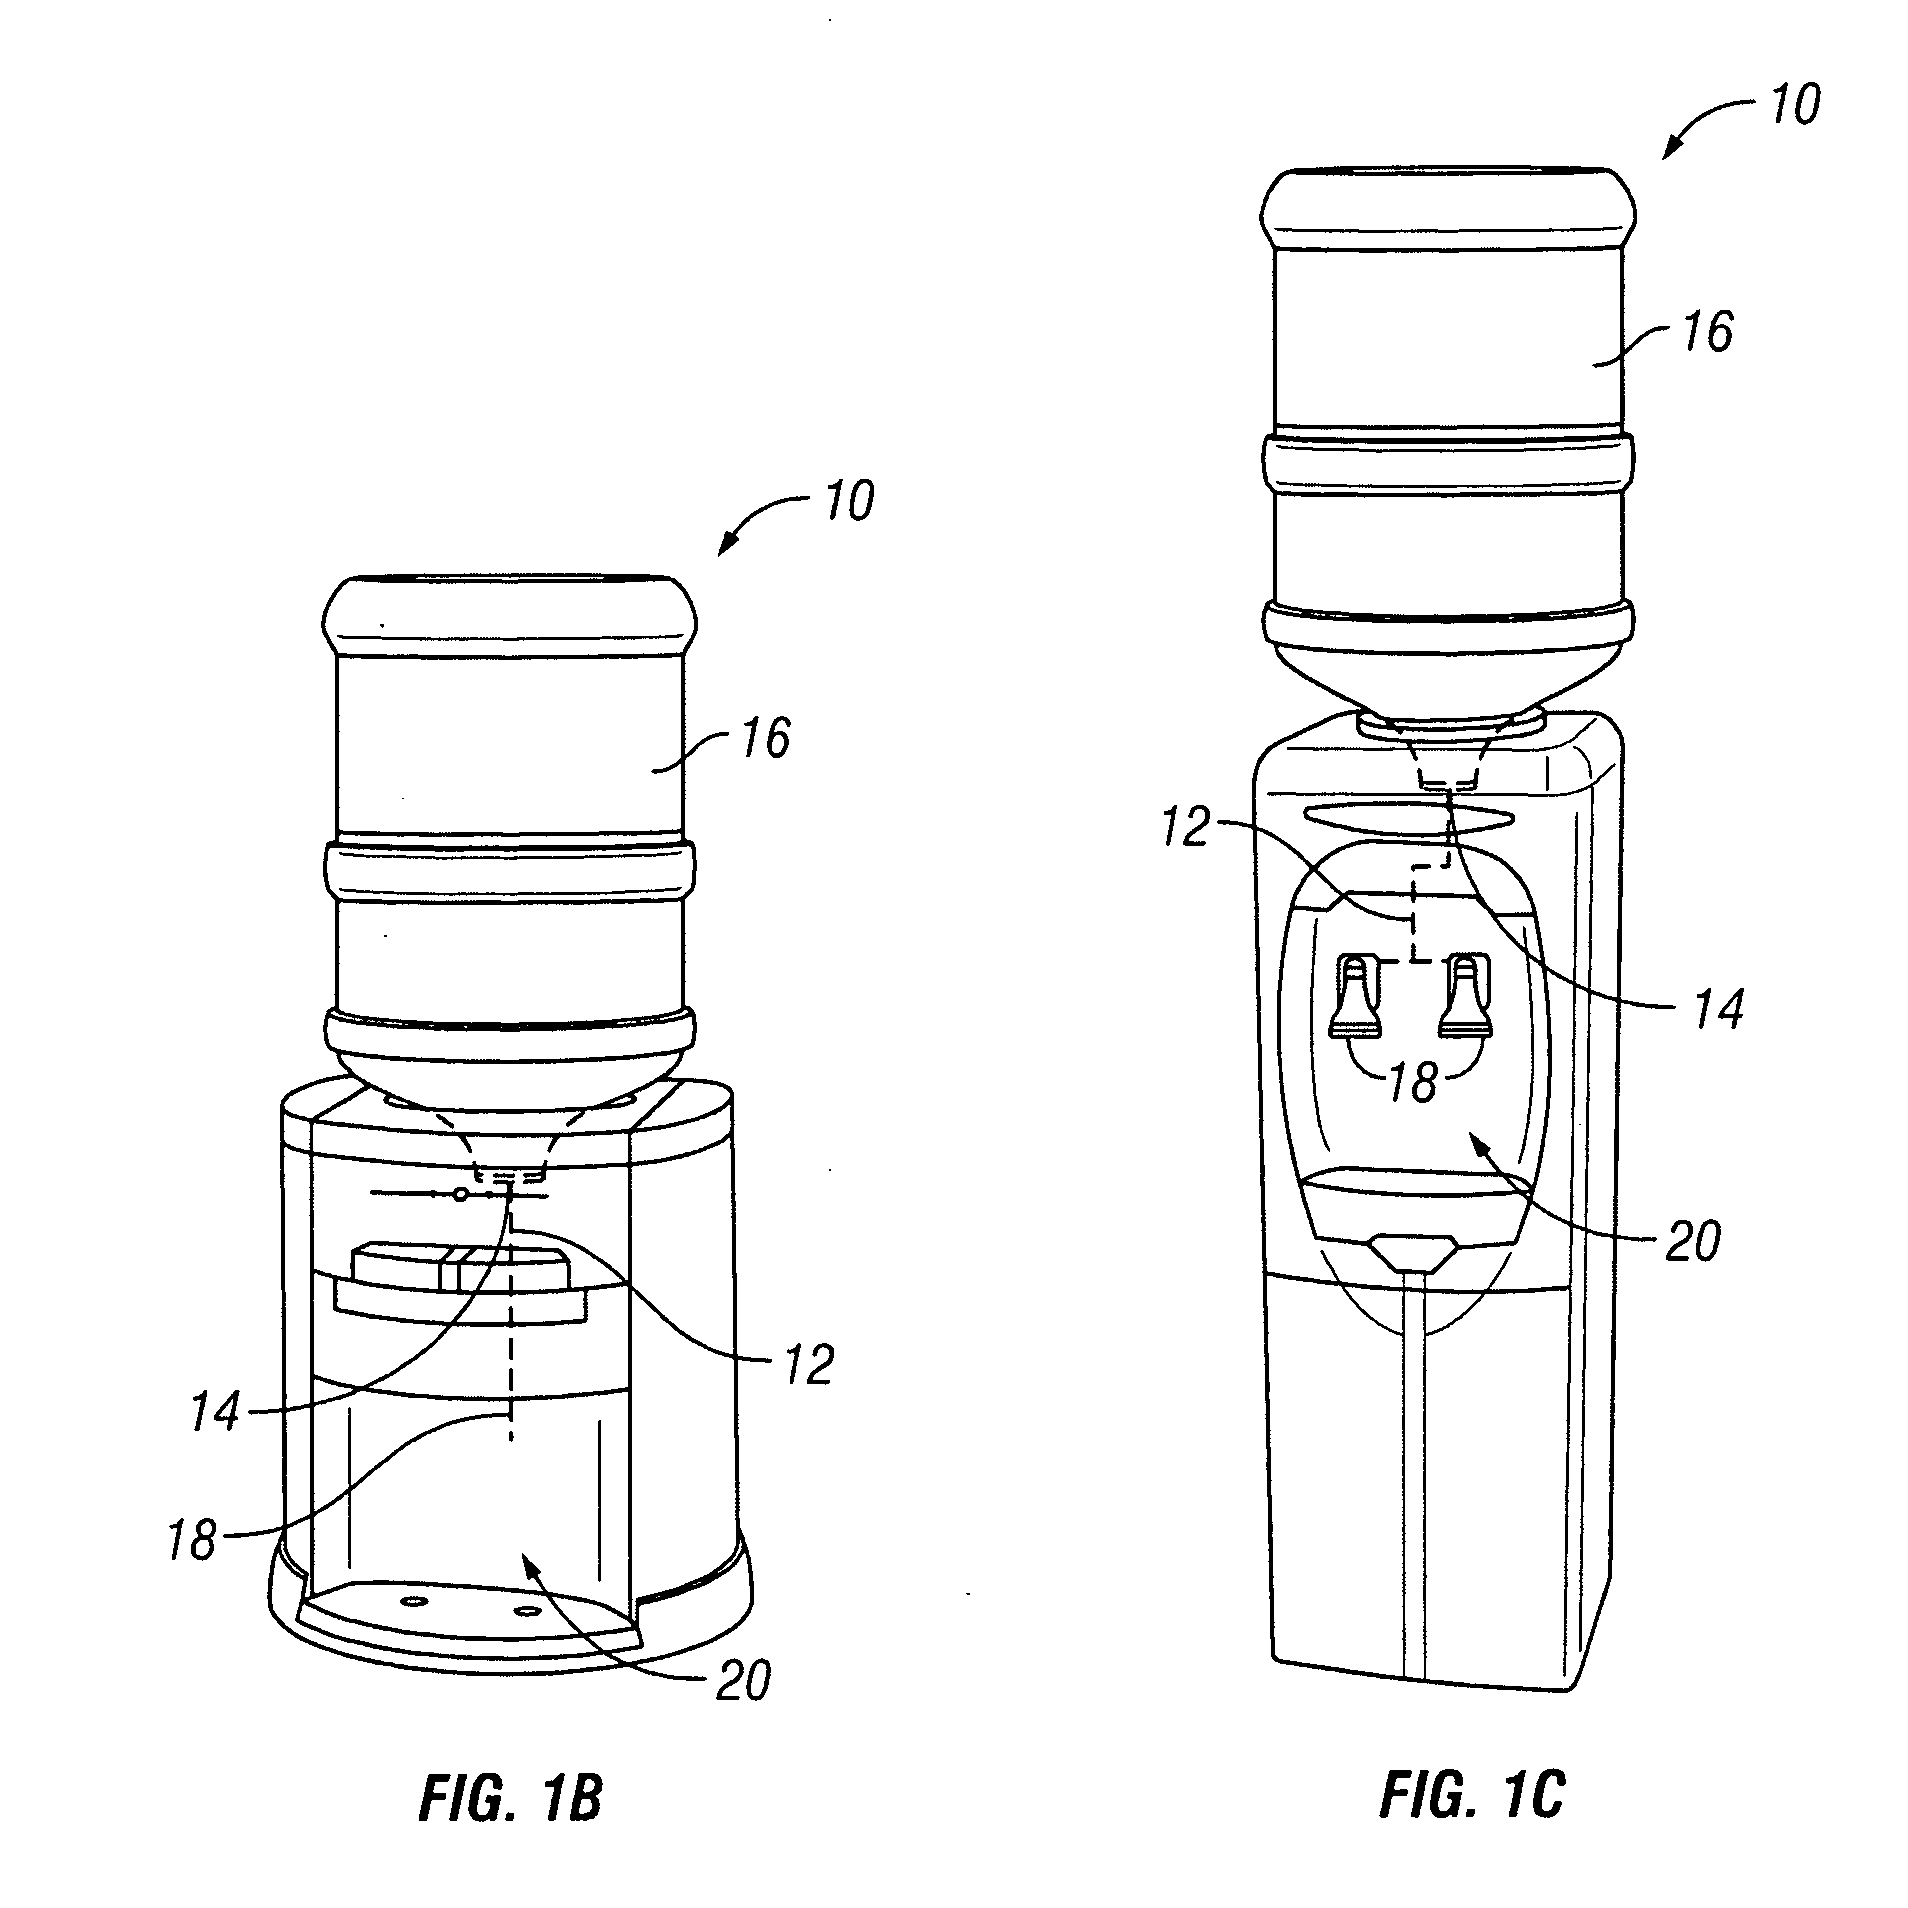 Liquid flow control and beverage preparation apparatuses, methods and systems